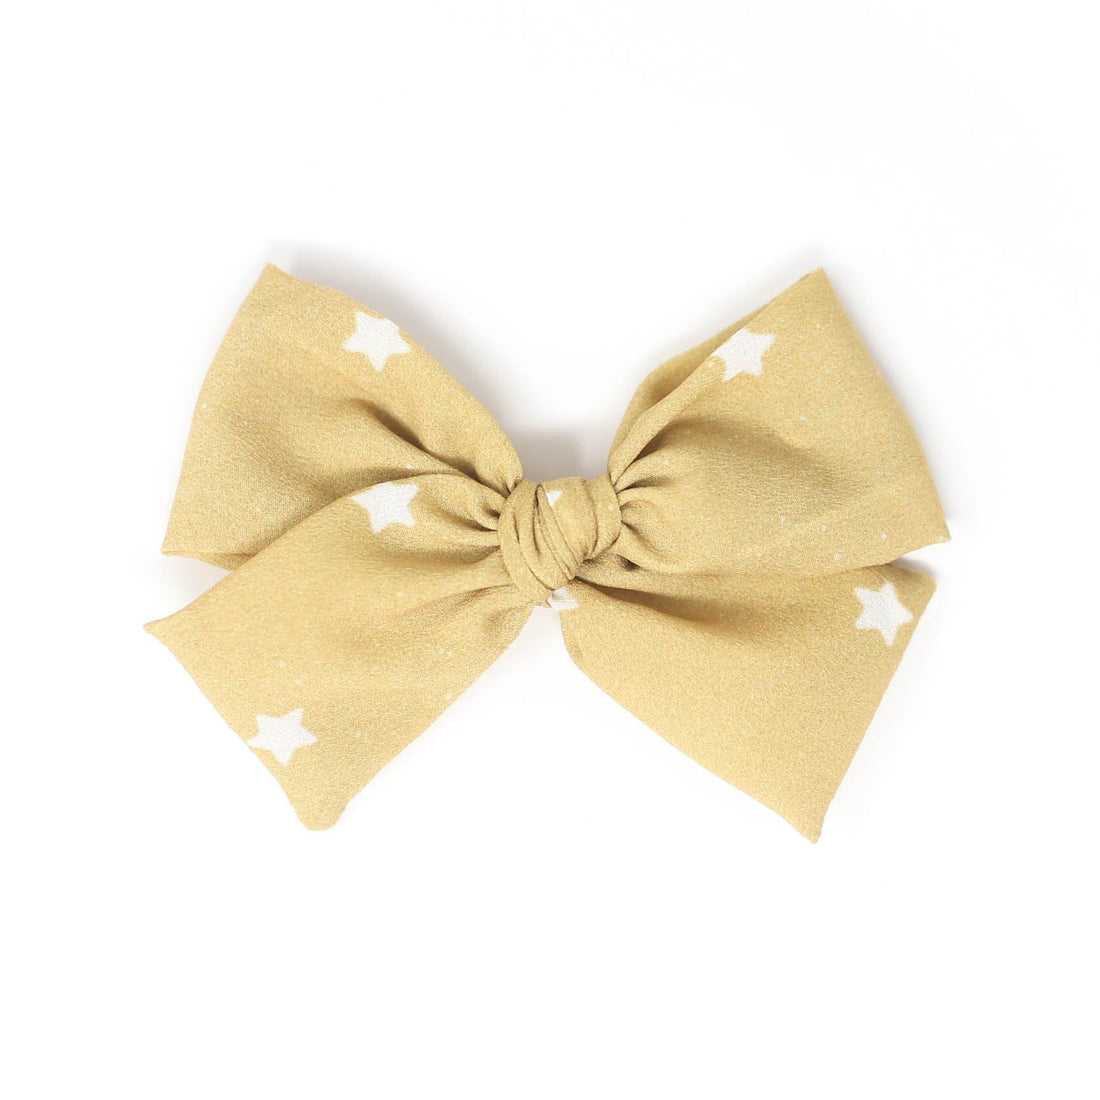 Elevate Your Style: How to Wear the Gold Stars | Midi Bow